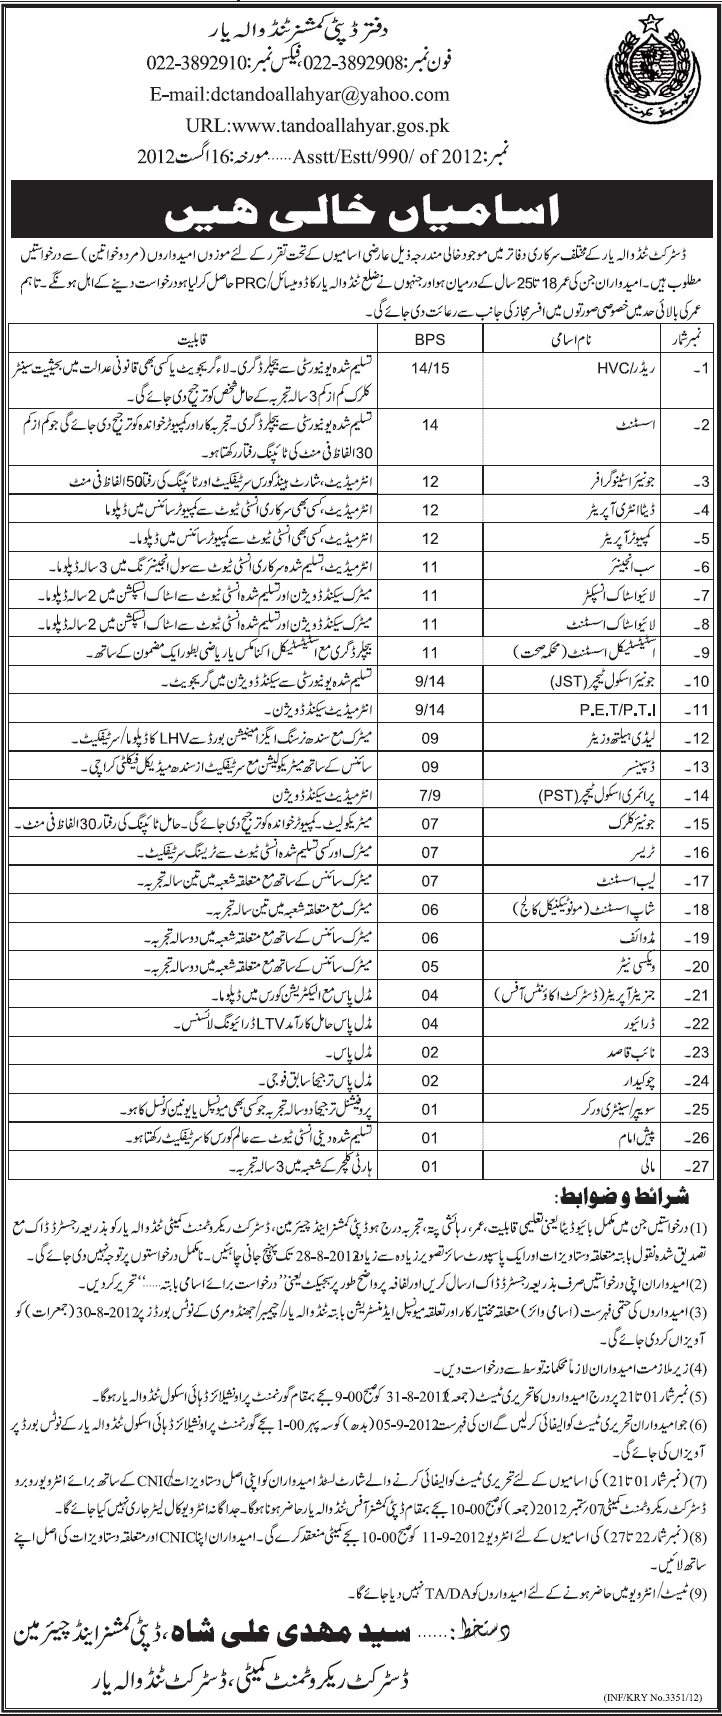 Technical and Office Support Staff Required in District Offices of Tando Allahyar (Government Job)